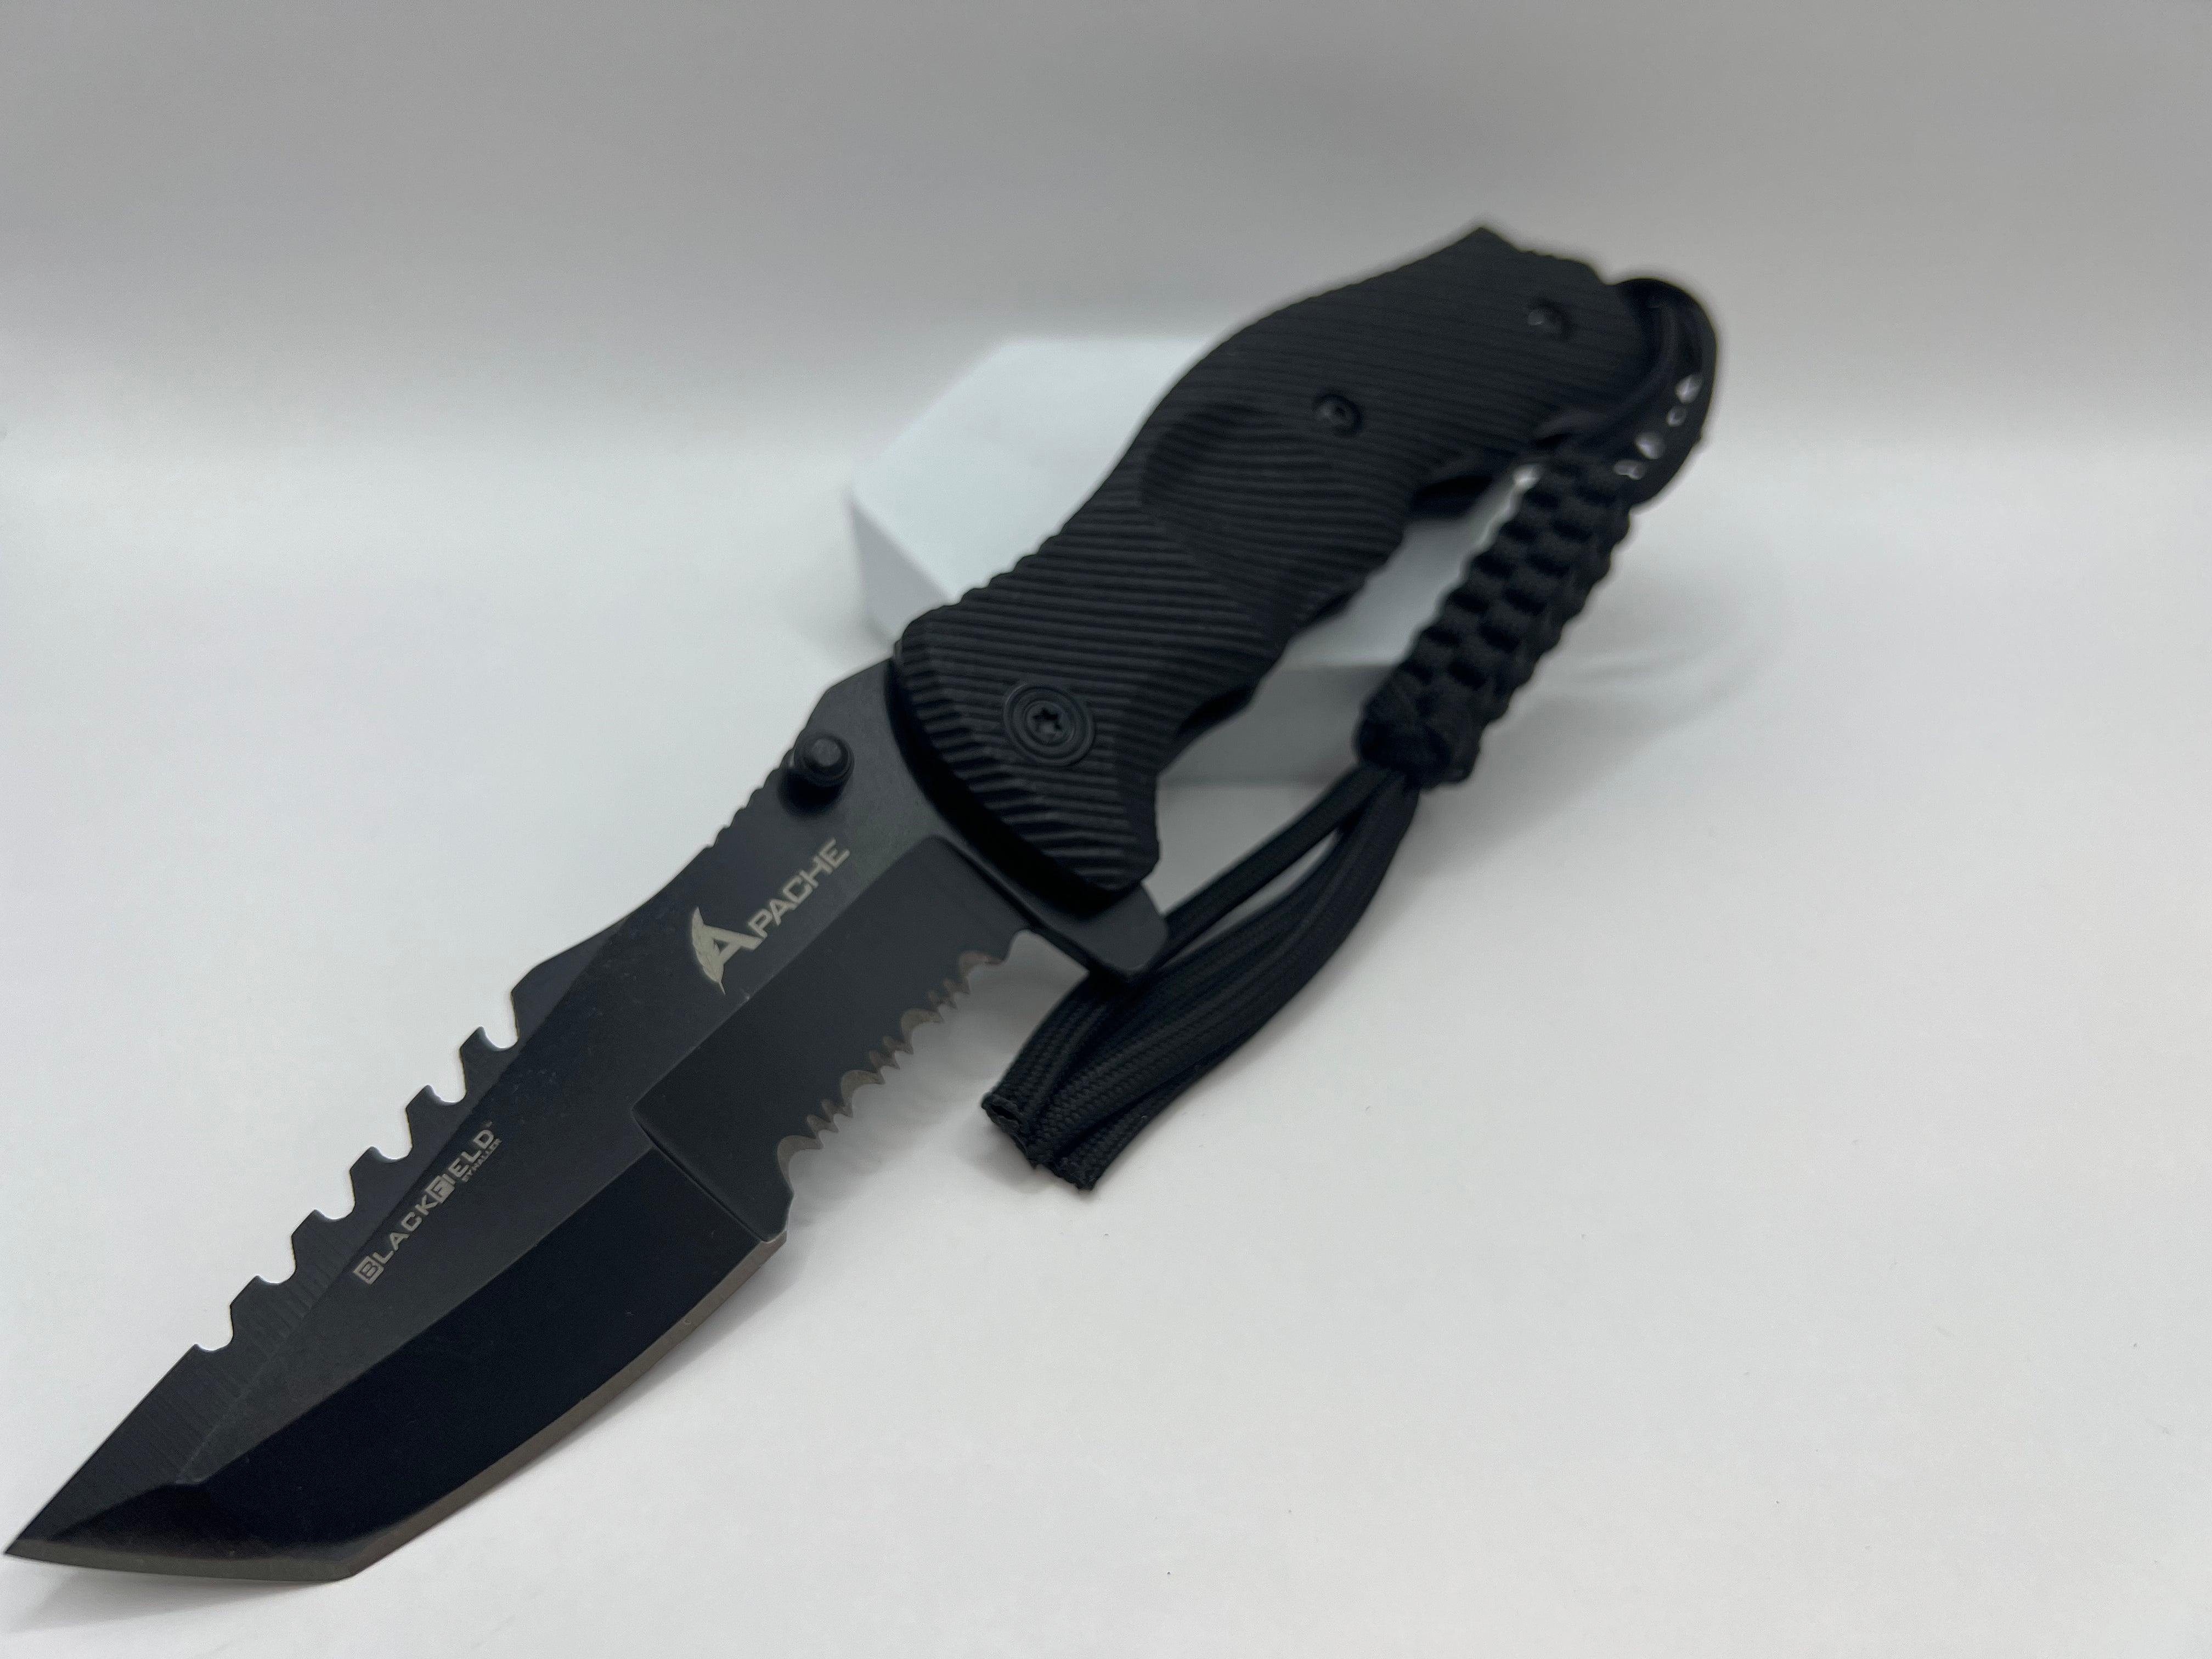 Black Field Apache Folder-The reliable insert pocket knife with spring-assisted blade opening